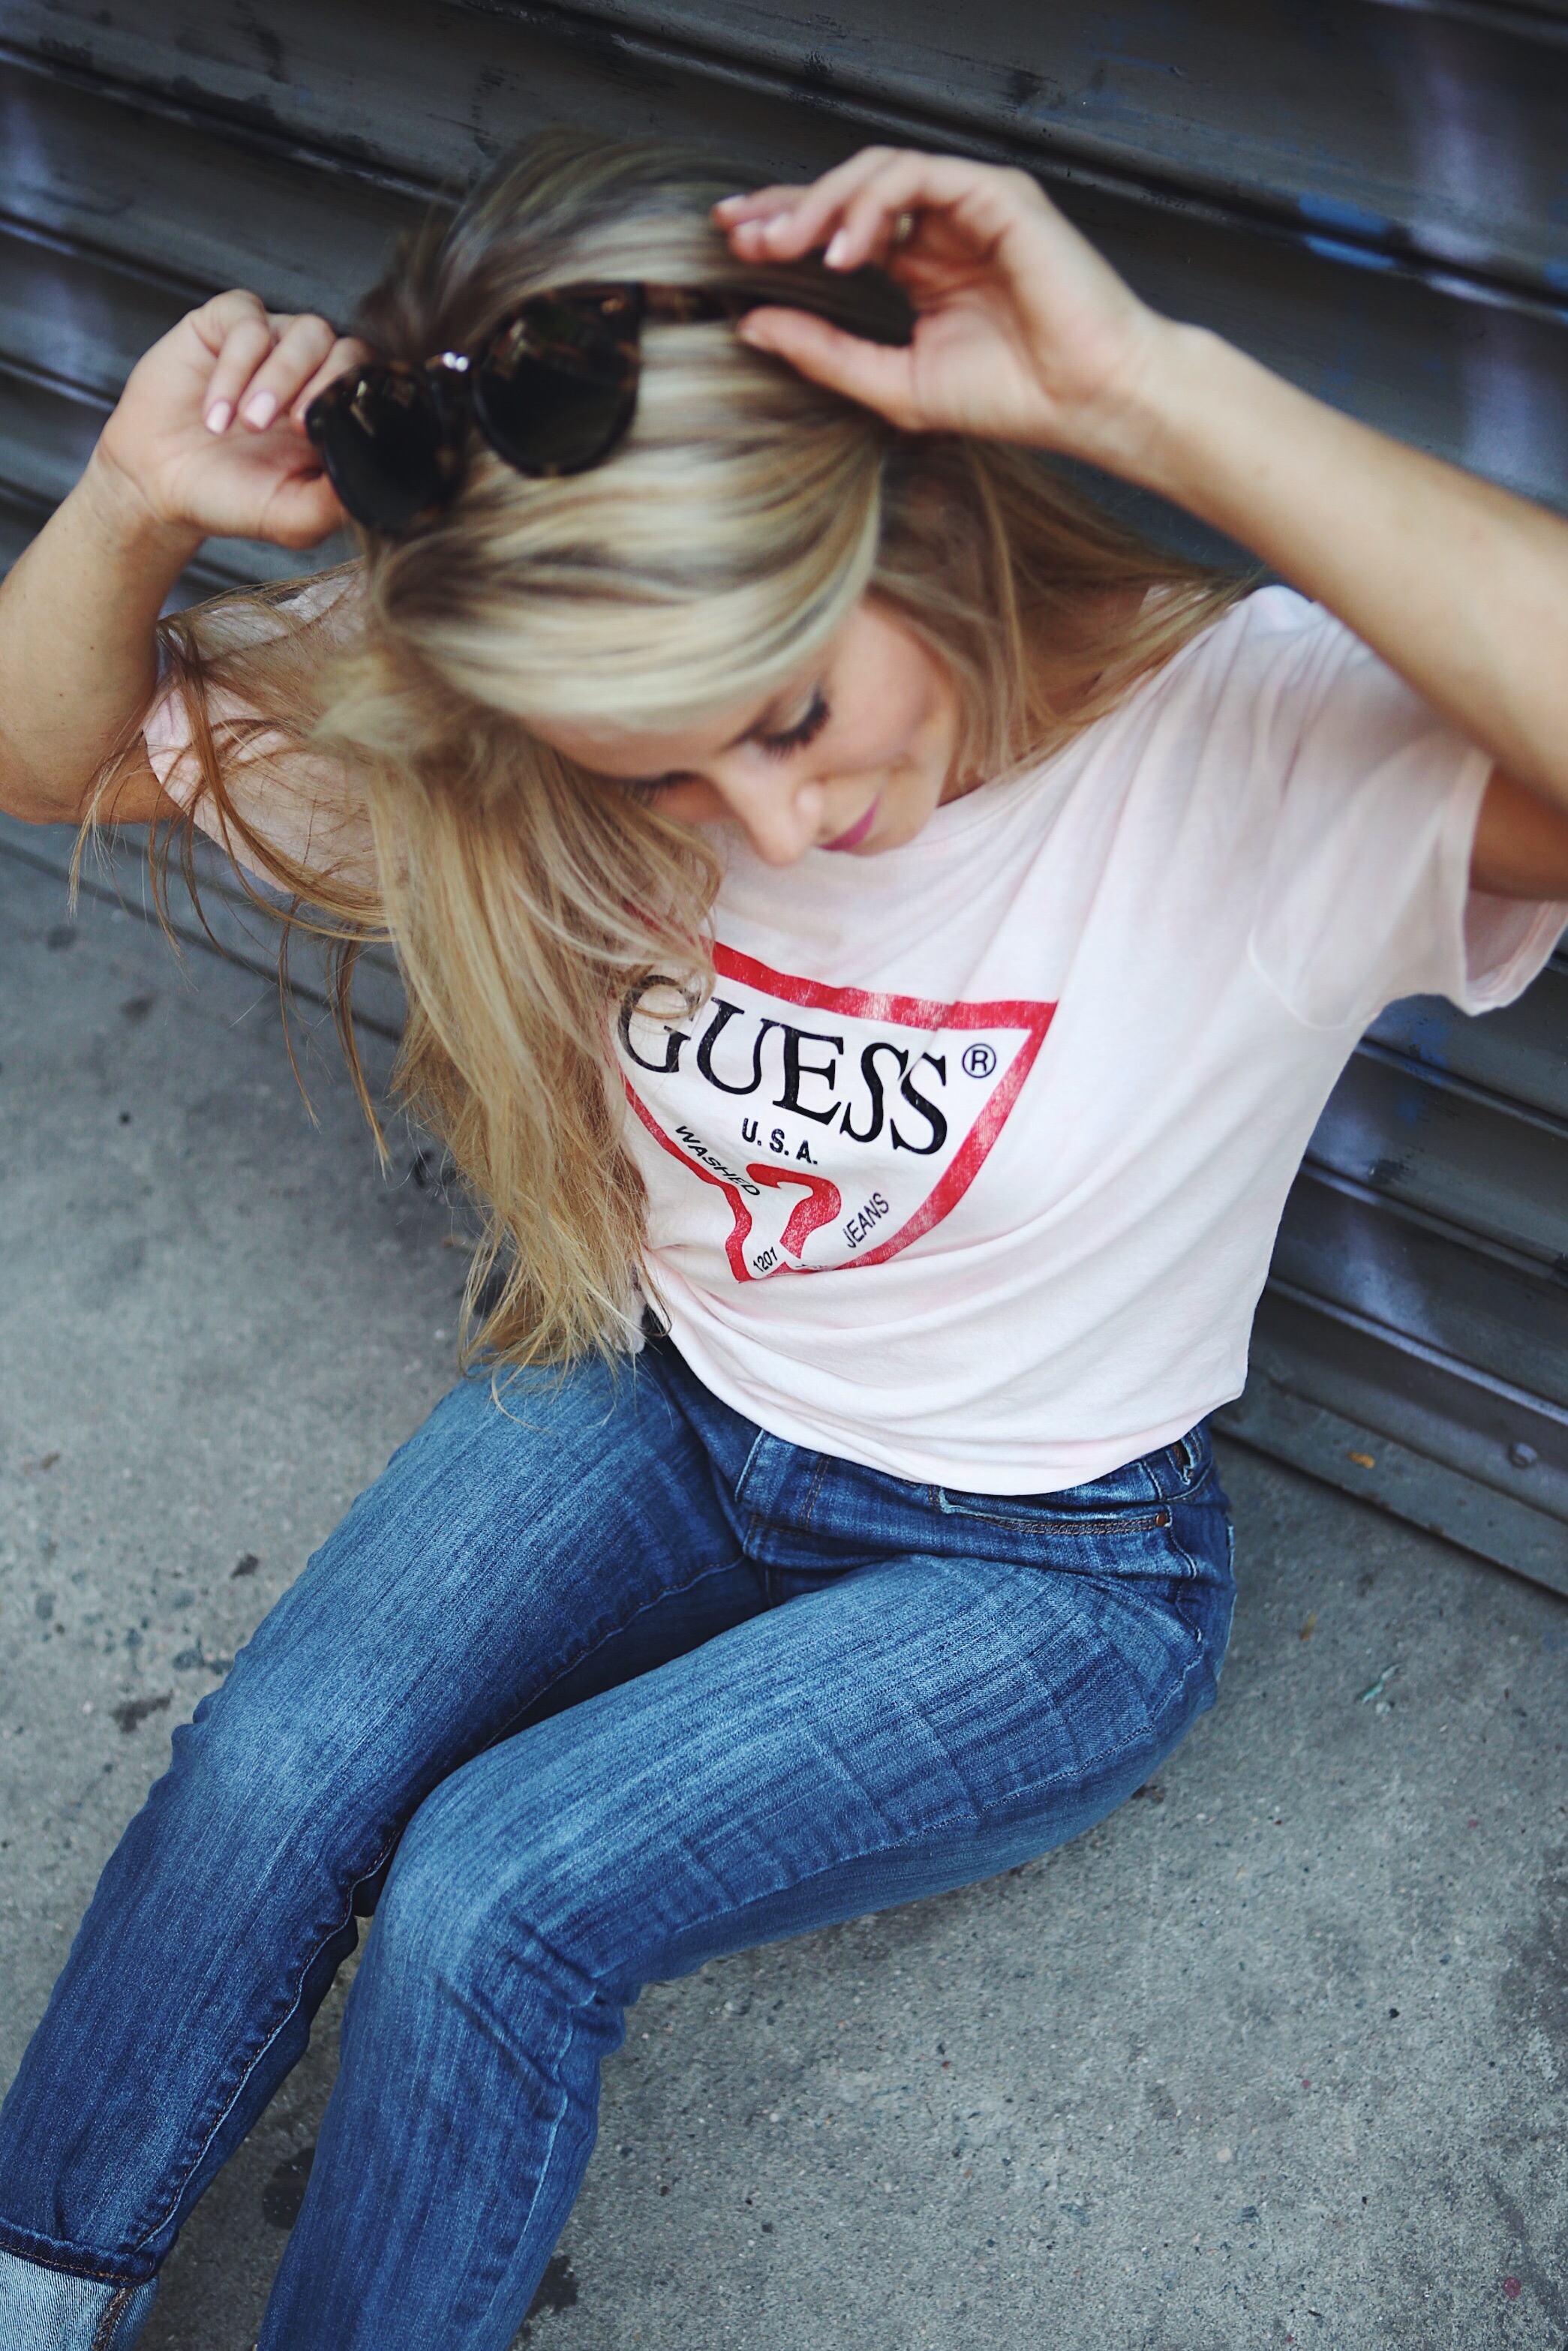 PacSun Denim Collection - Welcome to Olivia Rink